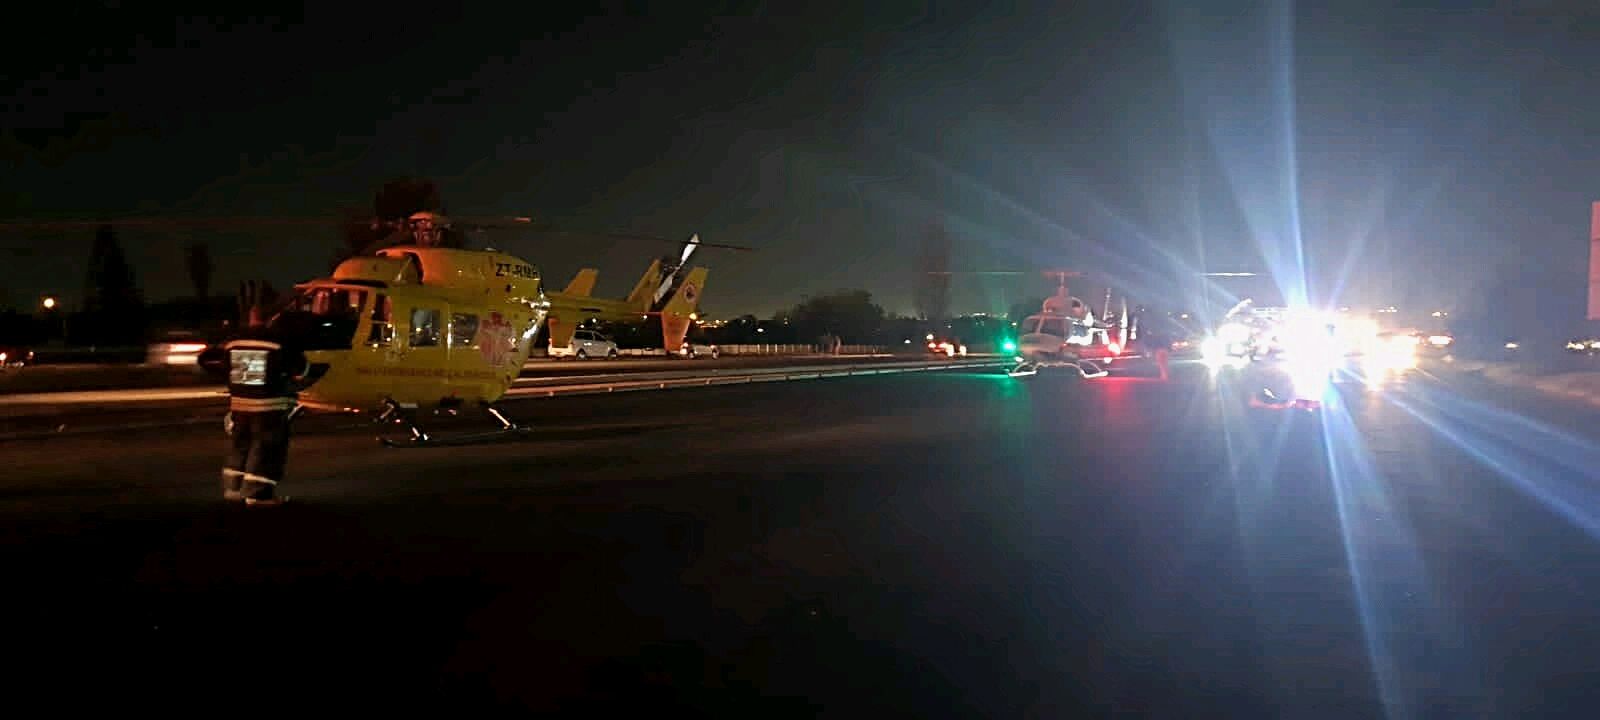 Adult and infant airlifted after a minibus crash in the Chloorkop area.